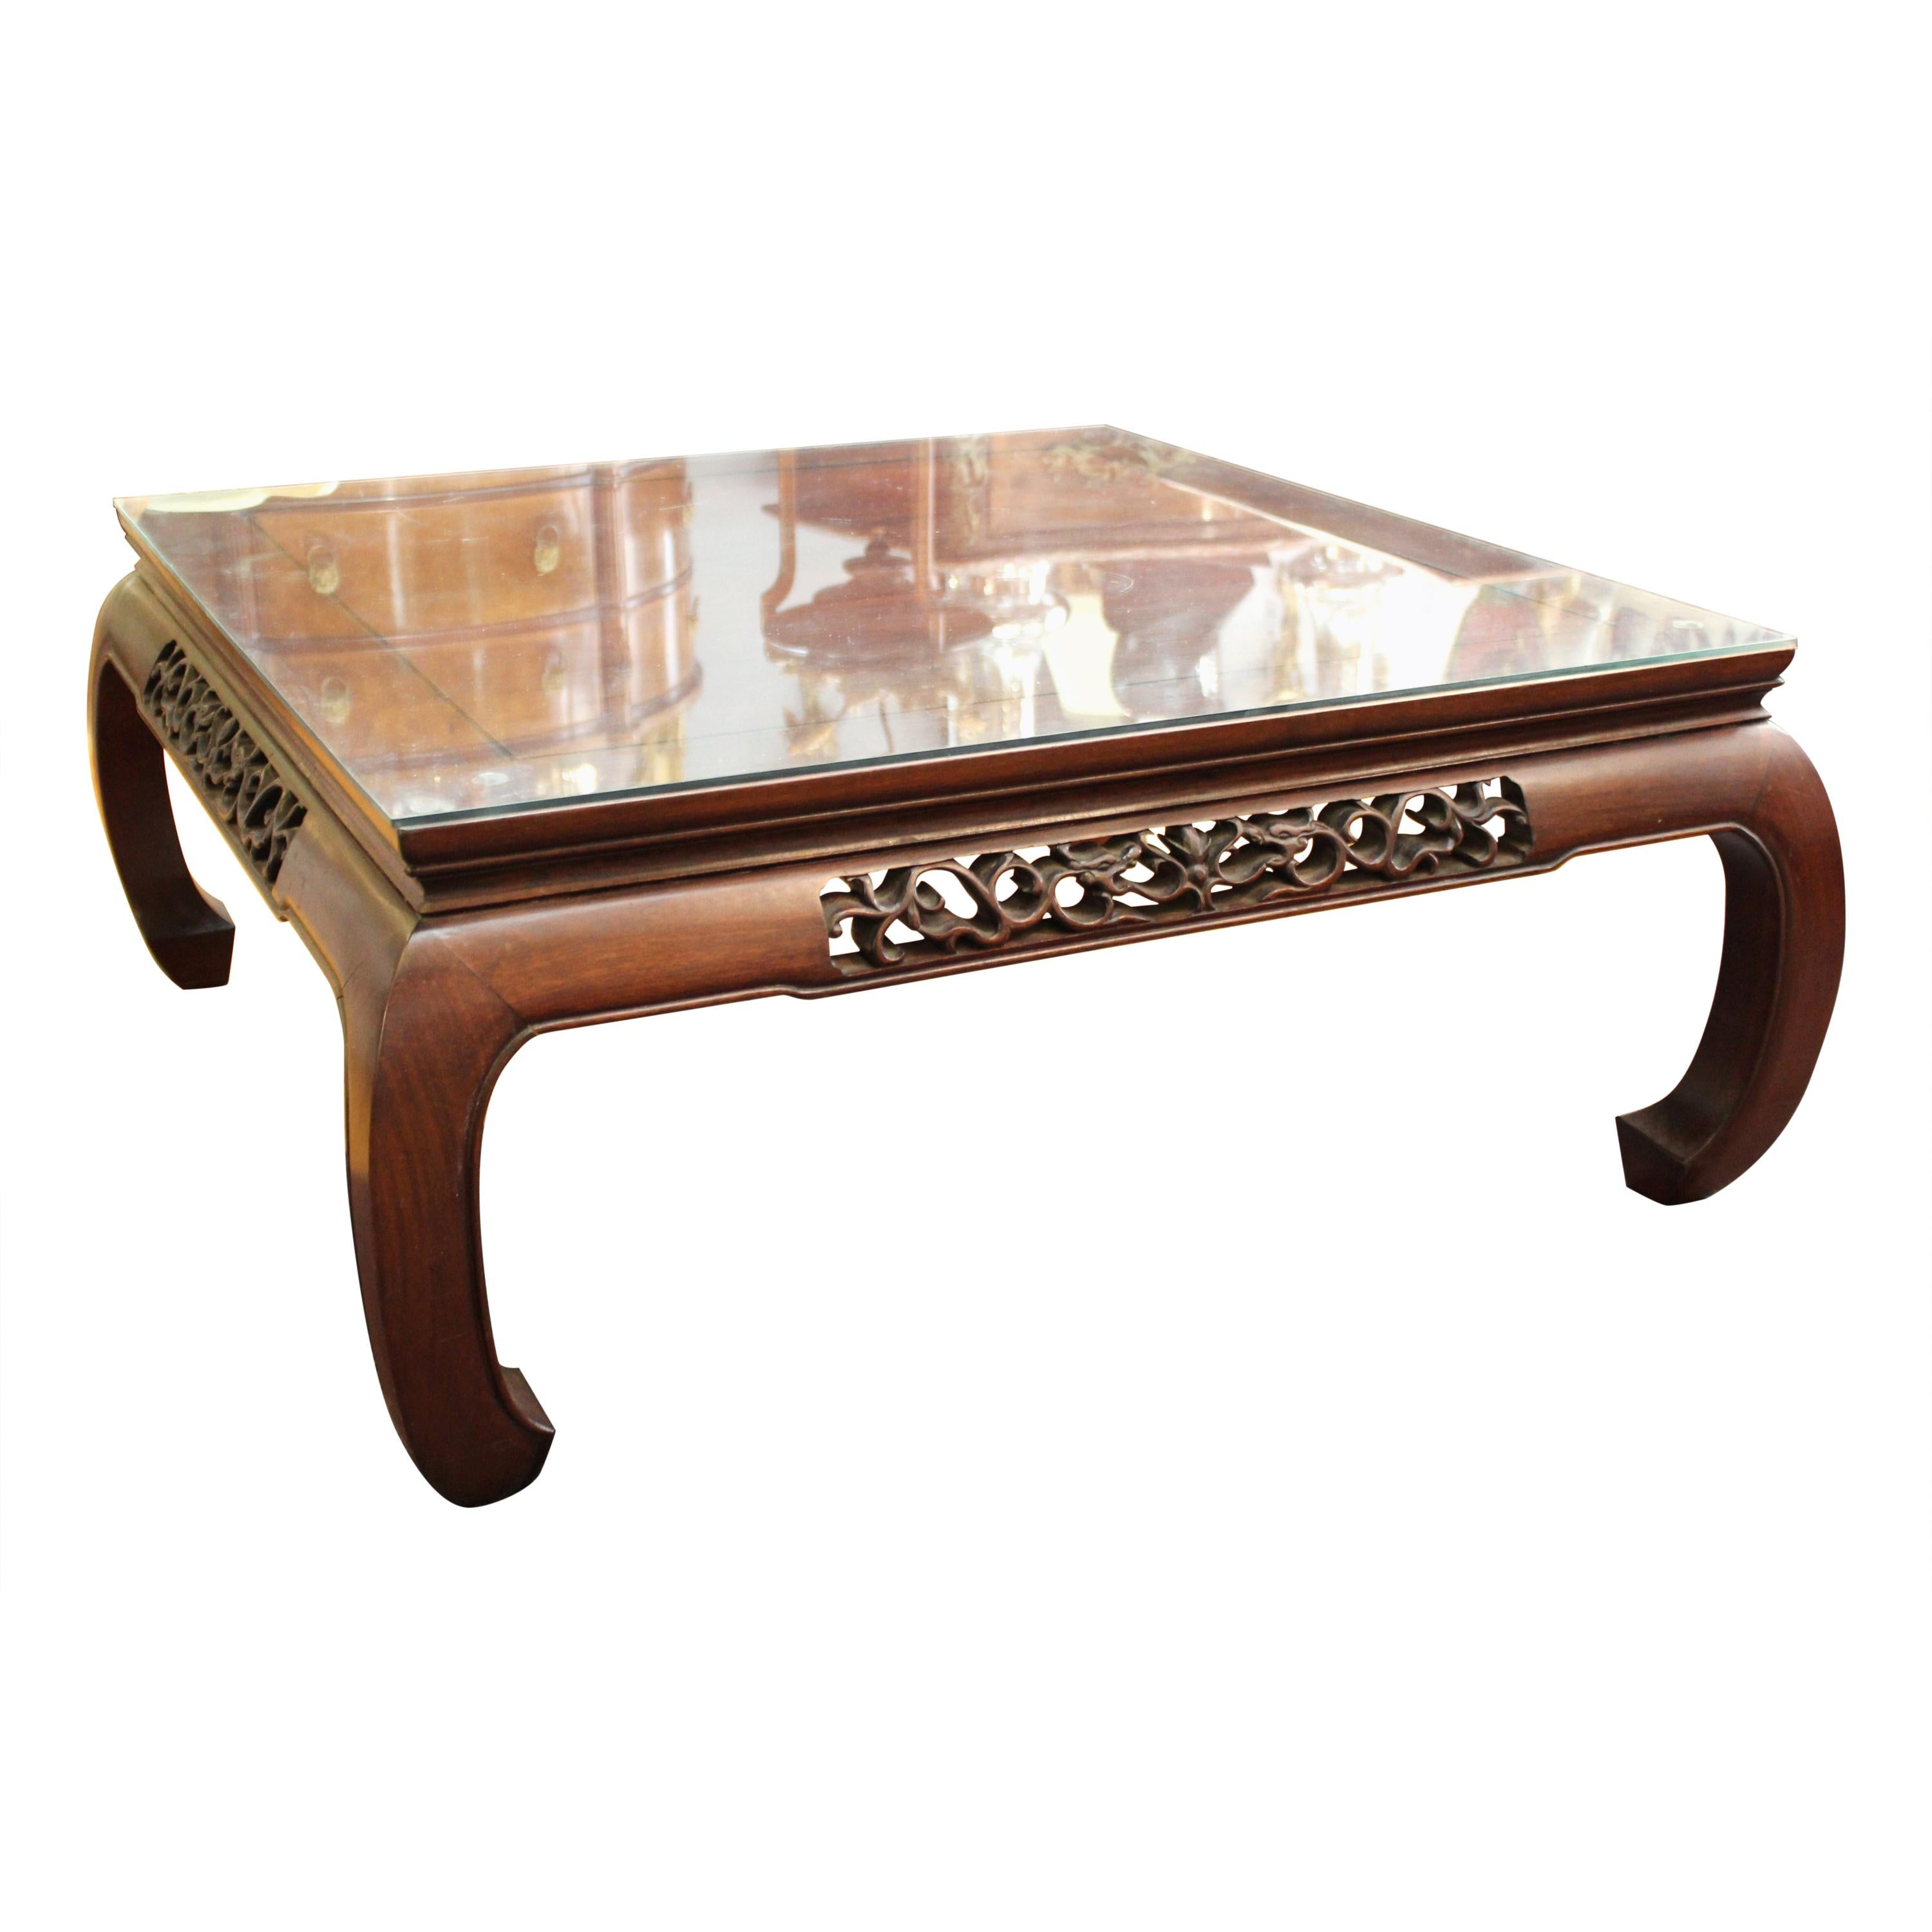 Modern Asian Style Square Coffee Table in Wood with Glass Top